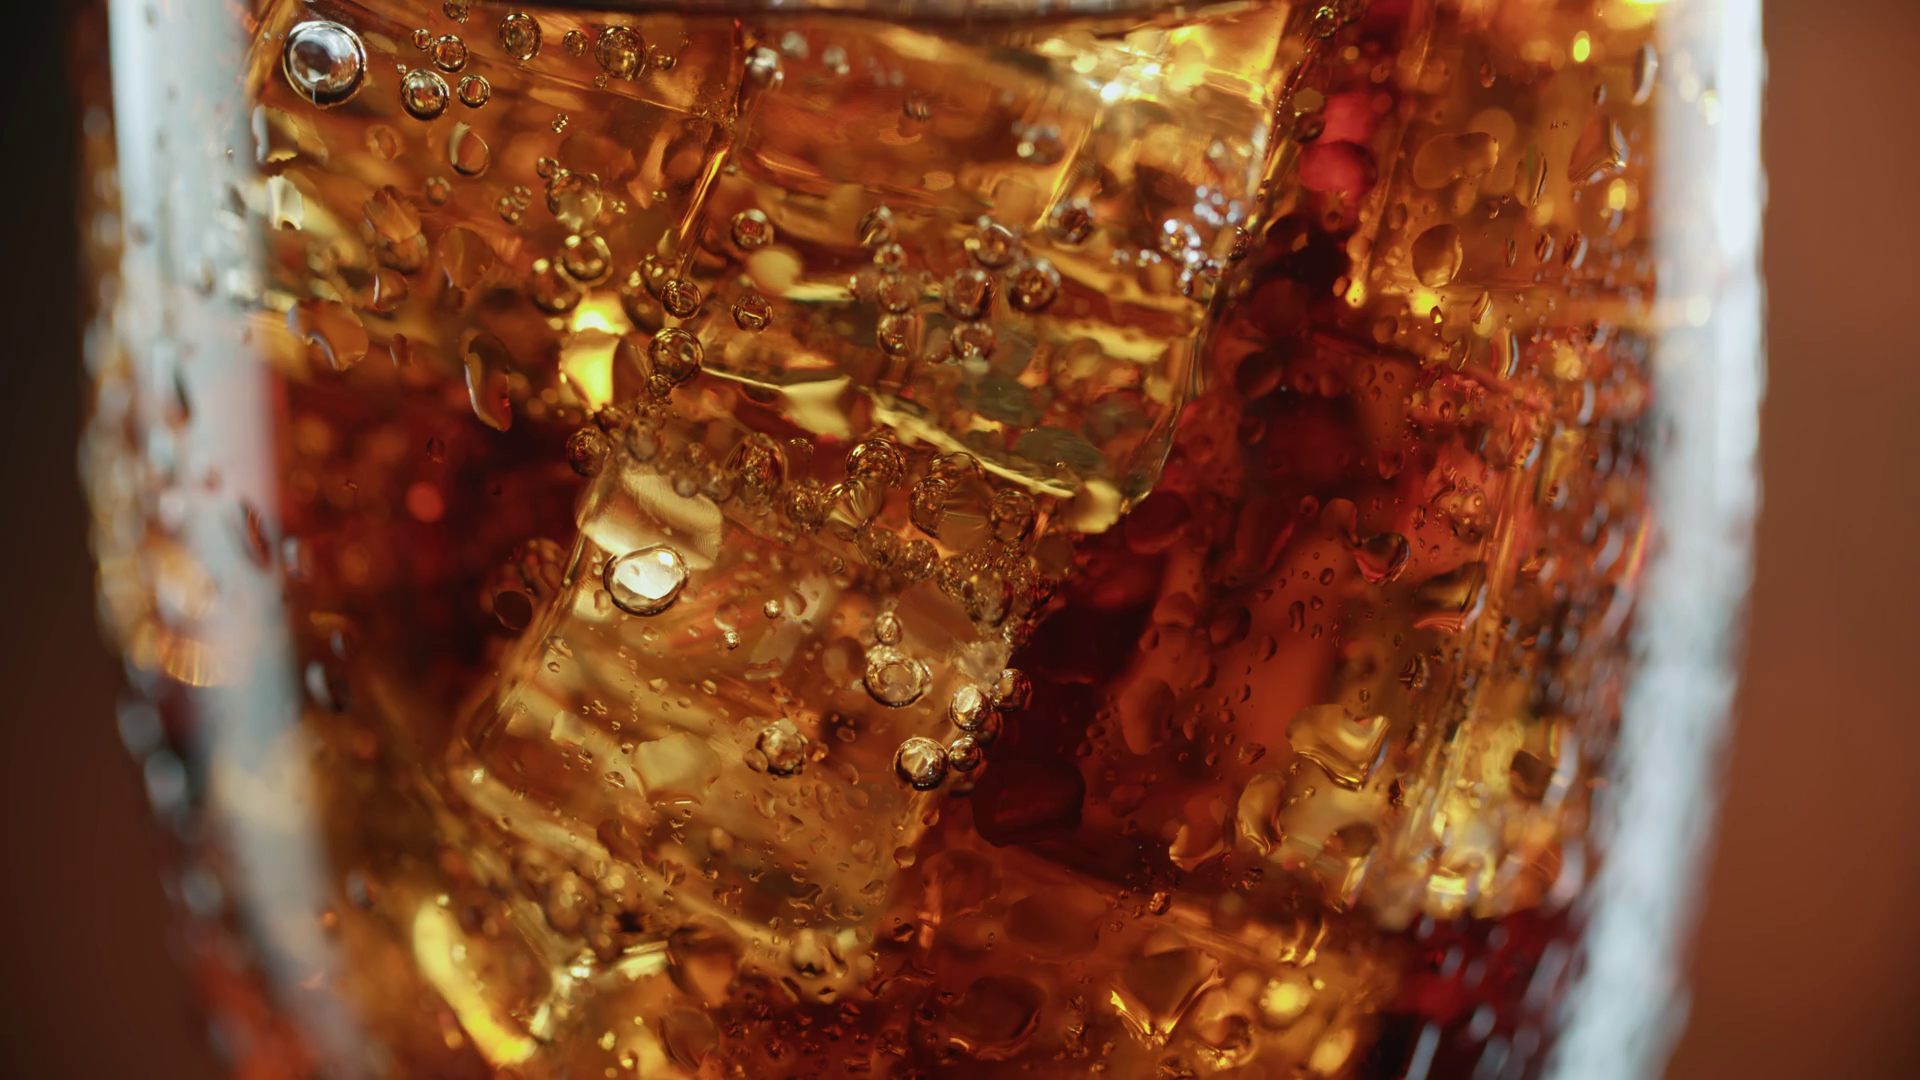 Coca-Cola in talks about Developing a Cannabis Infused Soft Drink